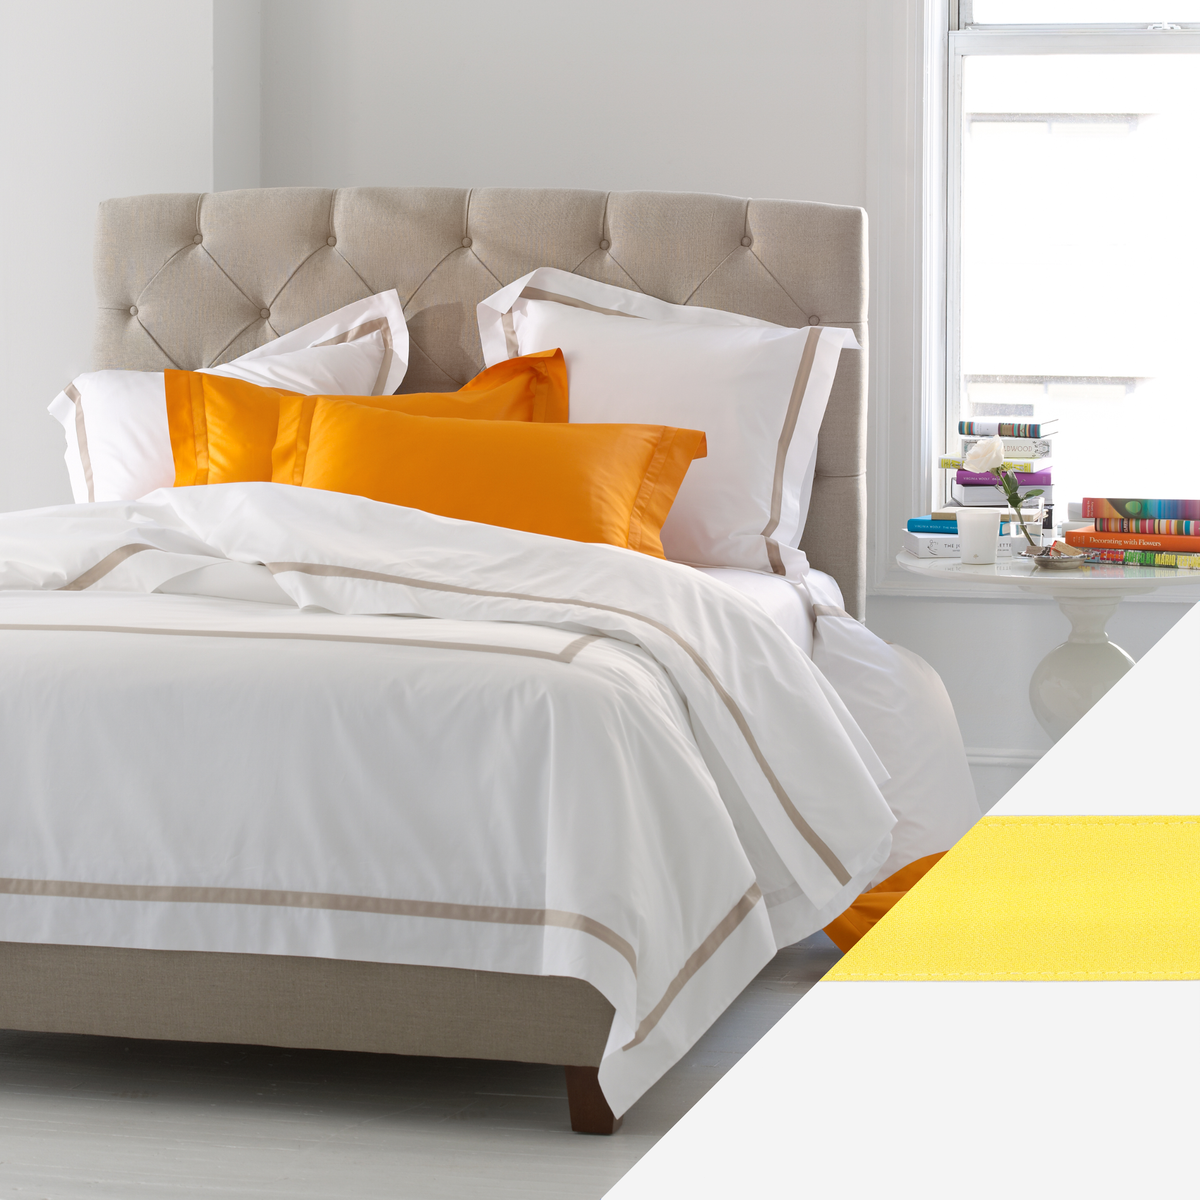 Full Bedding Of Matouk Lowell Collection with Lemon Swatch